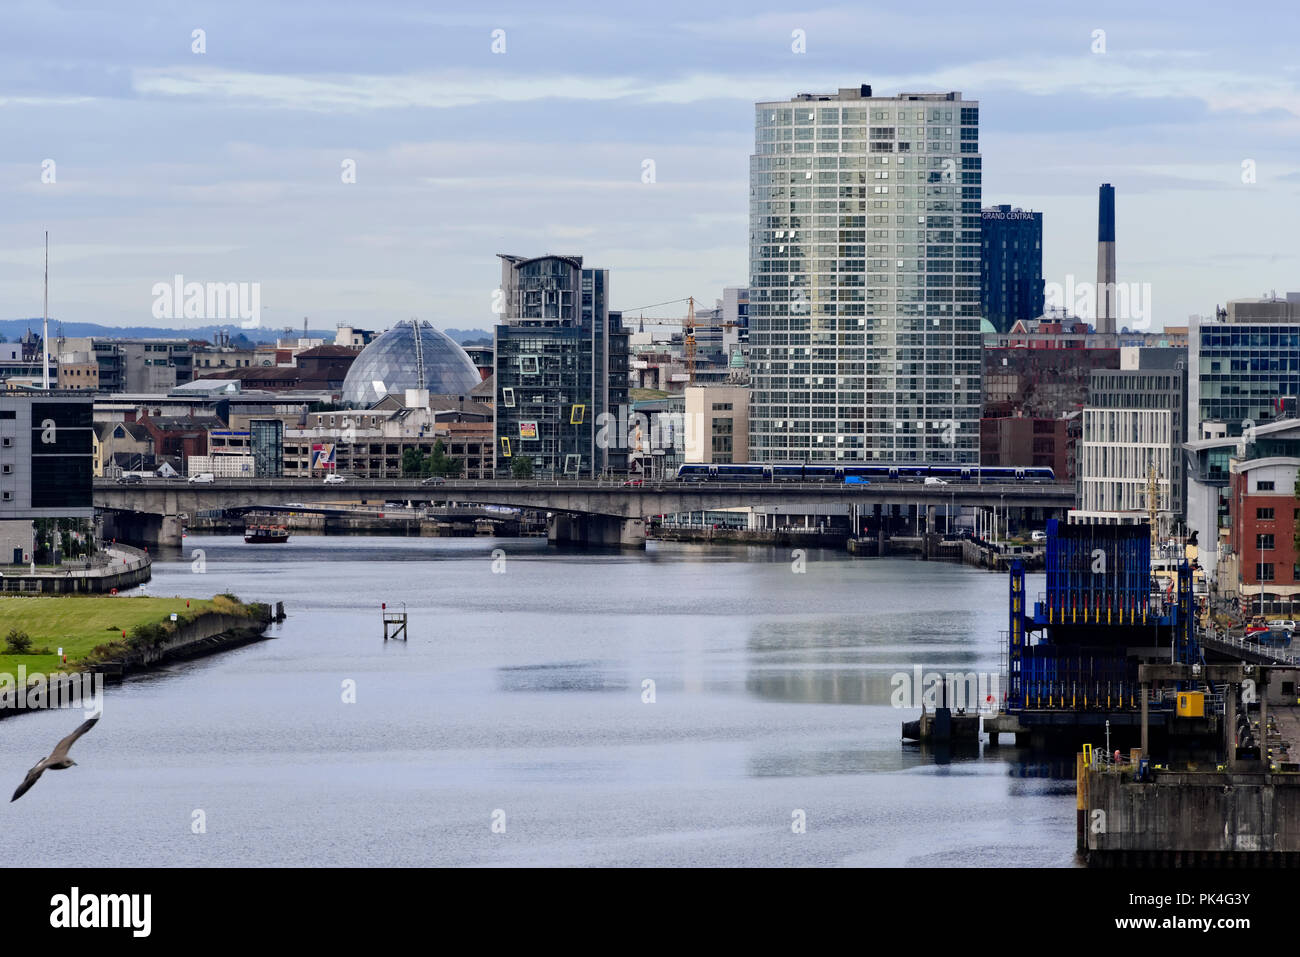 Belfast, Northern Ireland - August 8, 2018:  City of Belfast, capital and the largest city in Northern Ireland, resides along the River Lagan. Stock Photo